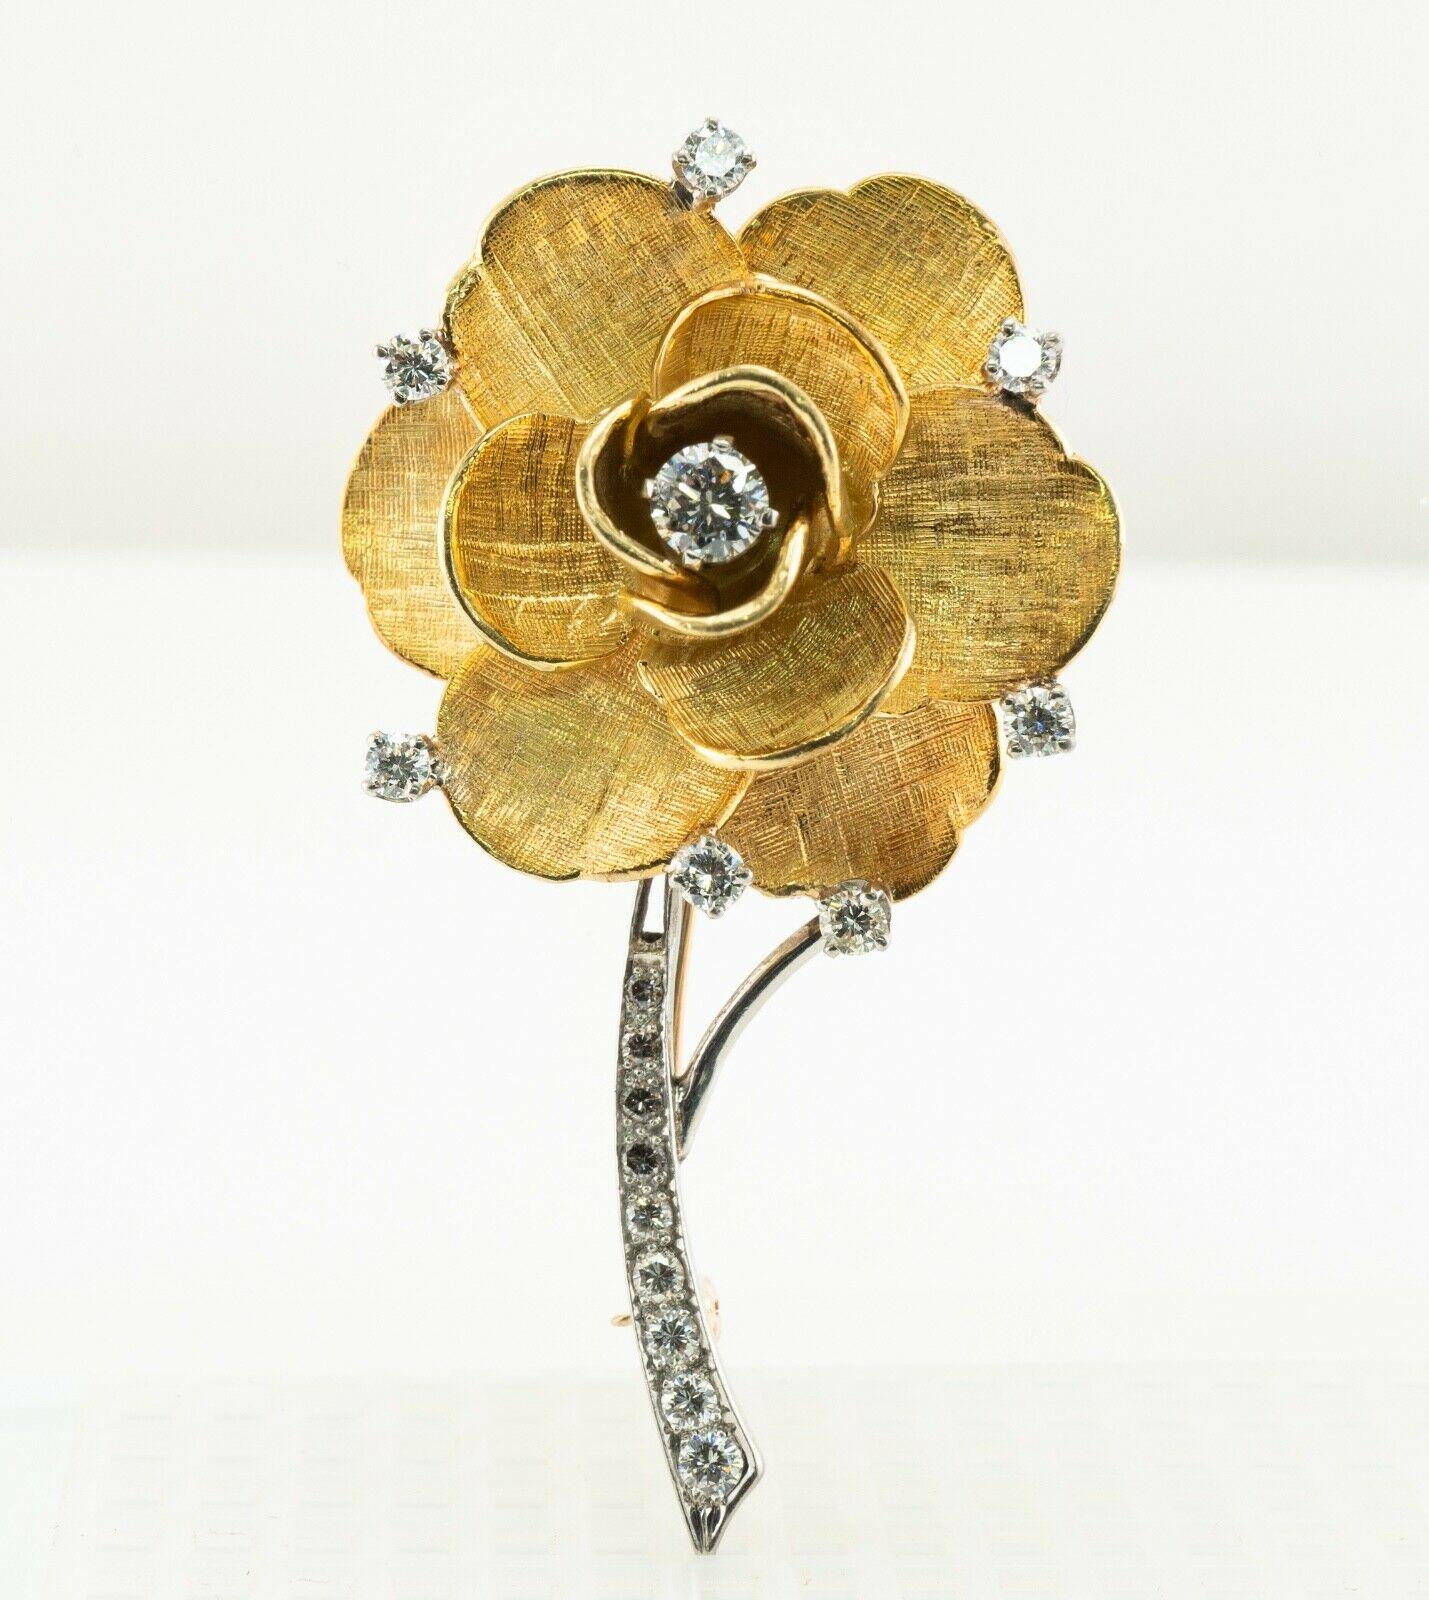 This authentic Tiffany & Co brooch is finely crafted in solid 18K Yellow and White Gold in the shape of beautiful flower. Rare and unique, highly collectible. The center round brilliant cut diamond is .33 carat. Seven smaller diamonds are .08 carat